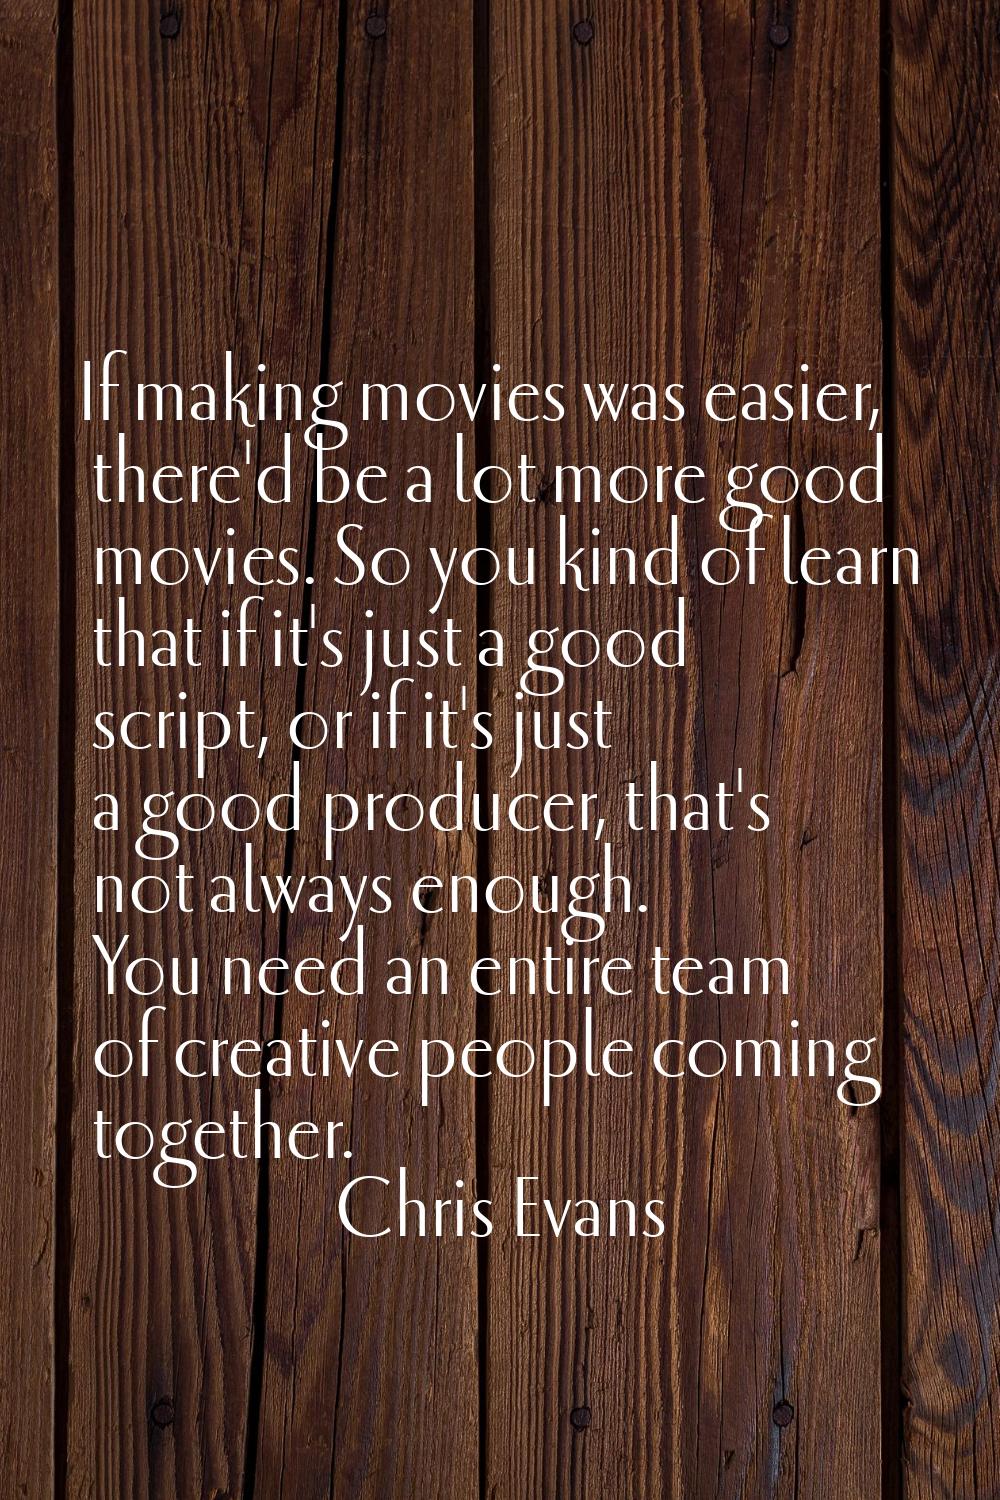 If making movies was easier, there'd be a lot more good movies. So you kind of learn that if it's j